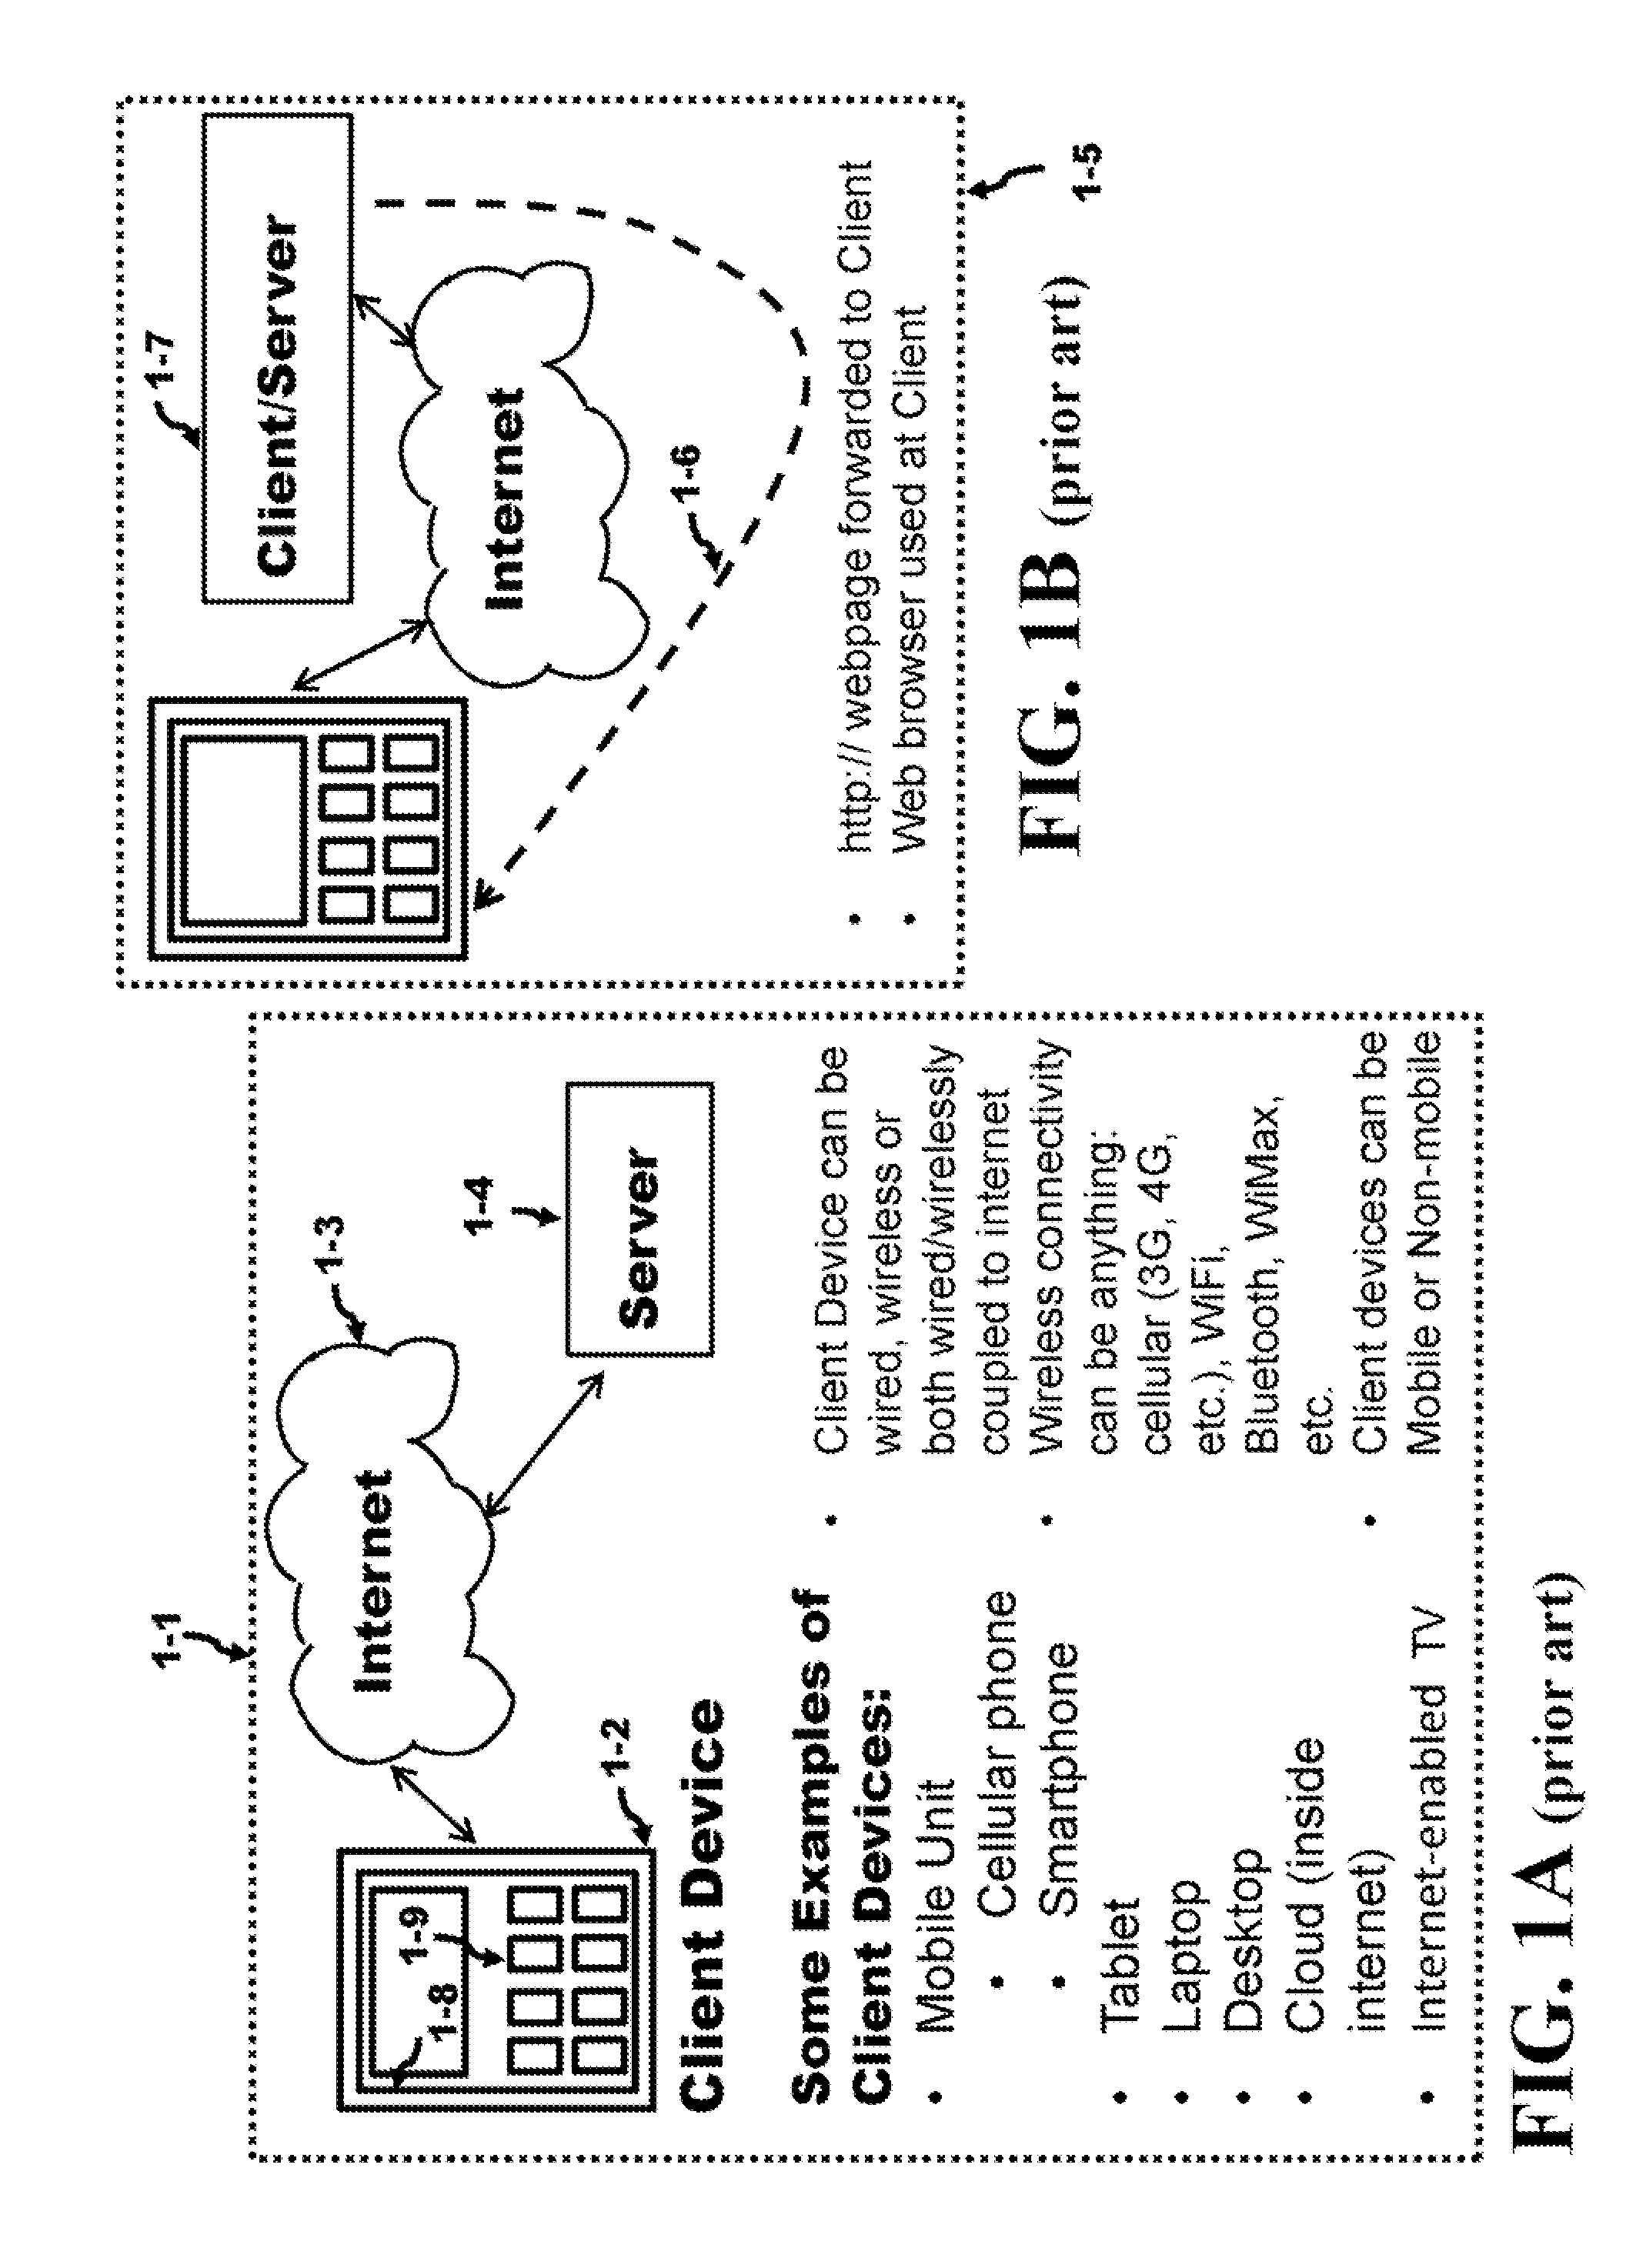 Apparatus for Single Workflow for Multi-Platform Mobile Application Creation and Delivery